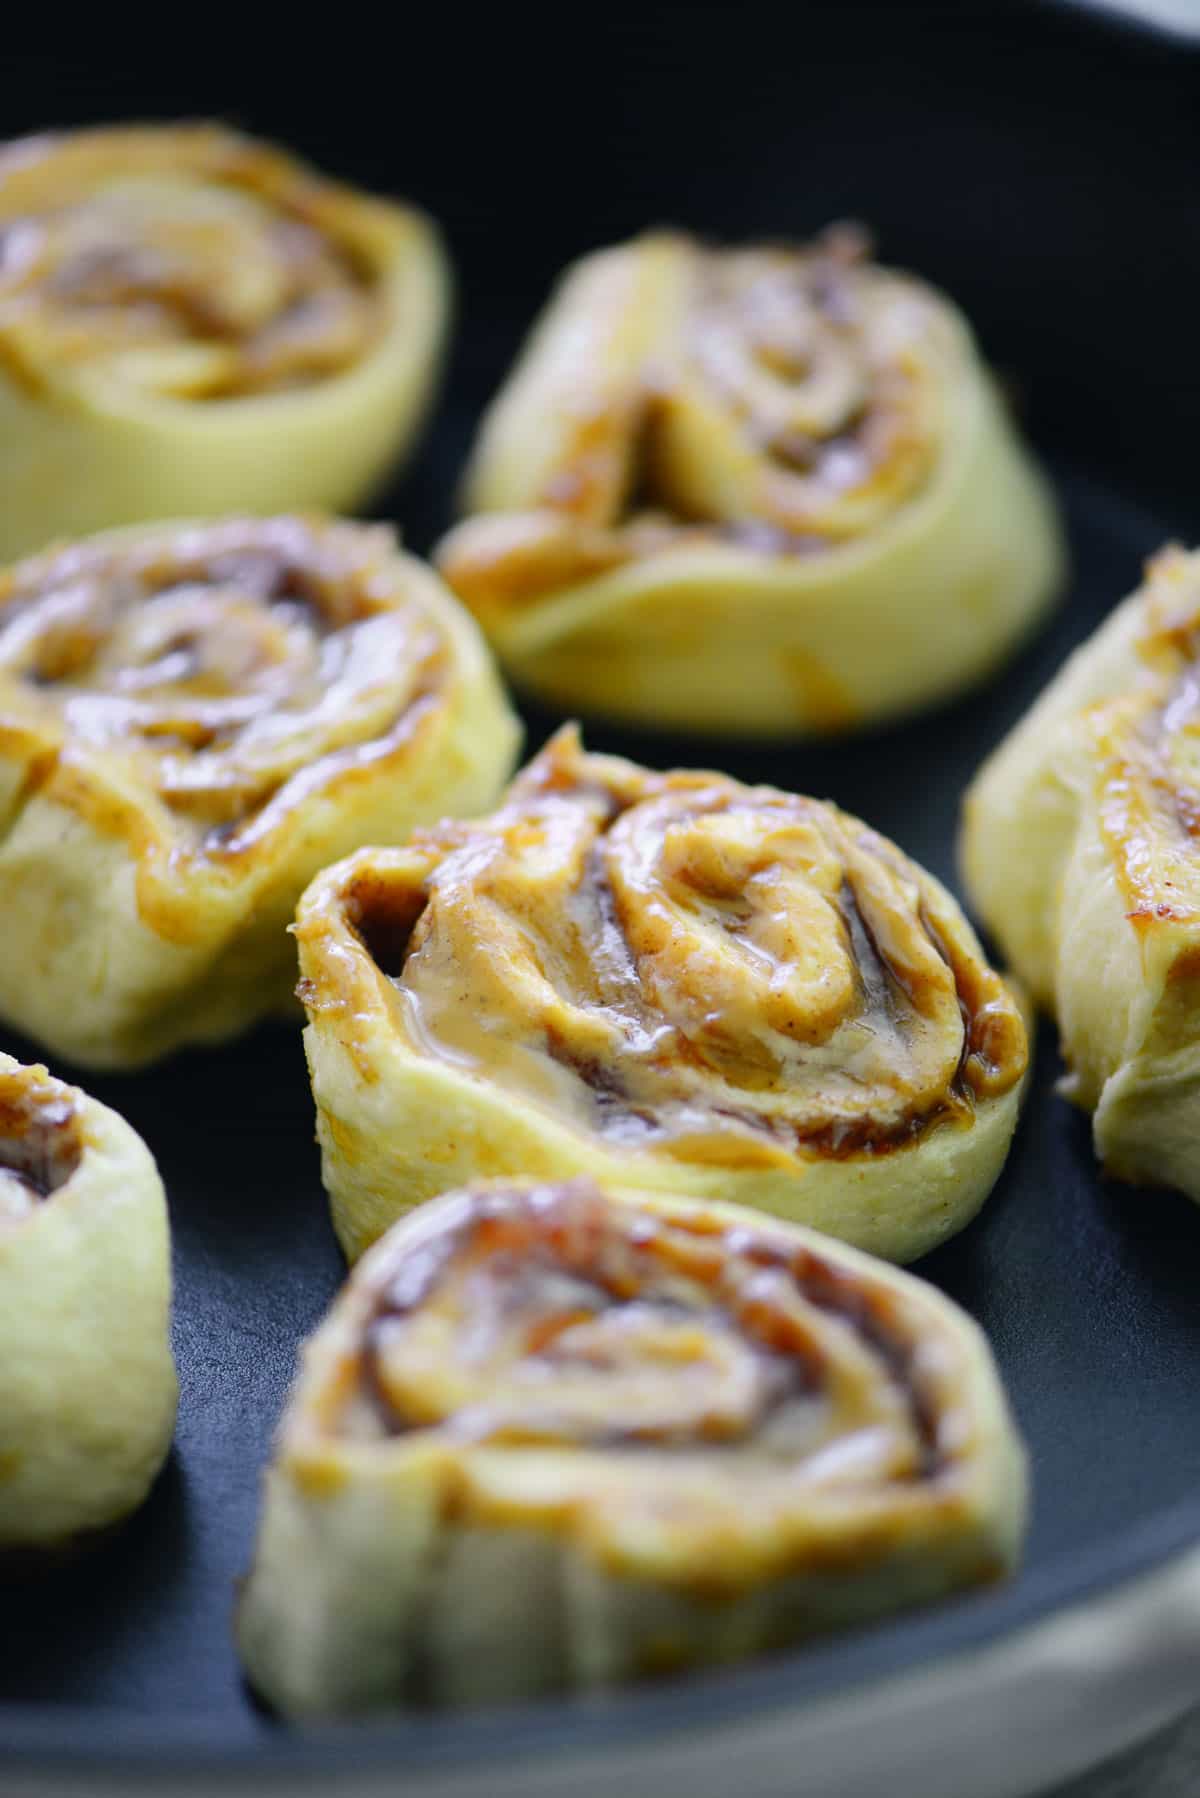 Peanut Butter and Jelly Crescent Roll Cinnamon Rolls